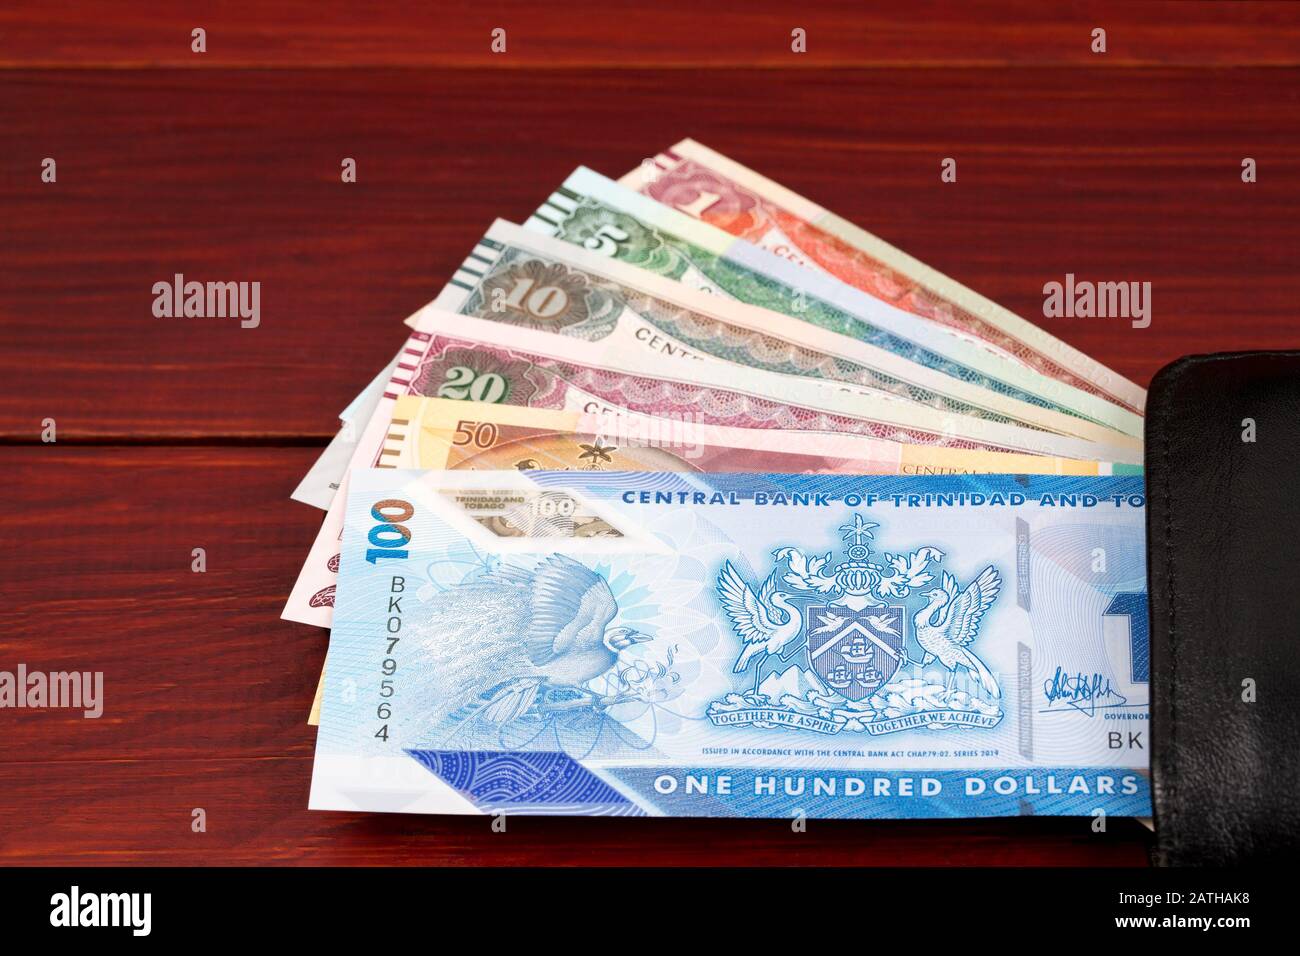 Trinidad And Tobago Money High Resolution Stock Photography And Images Alamy